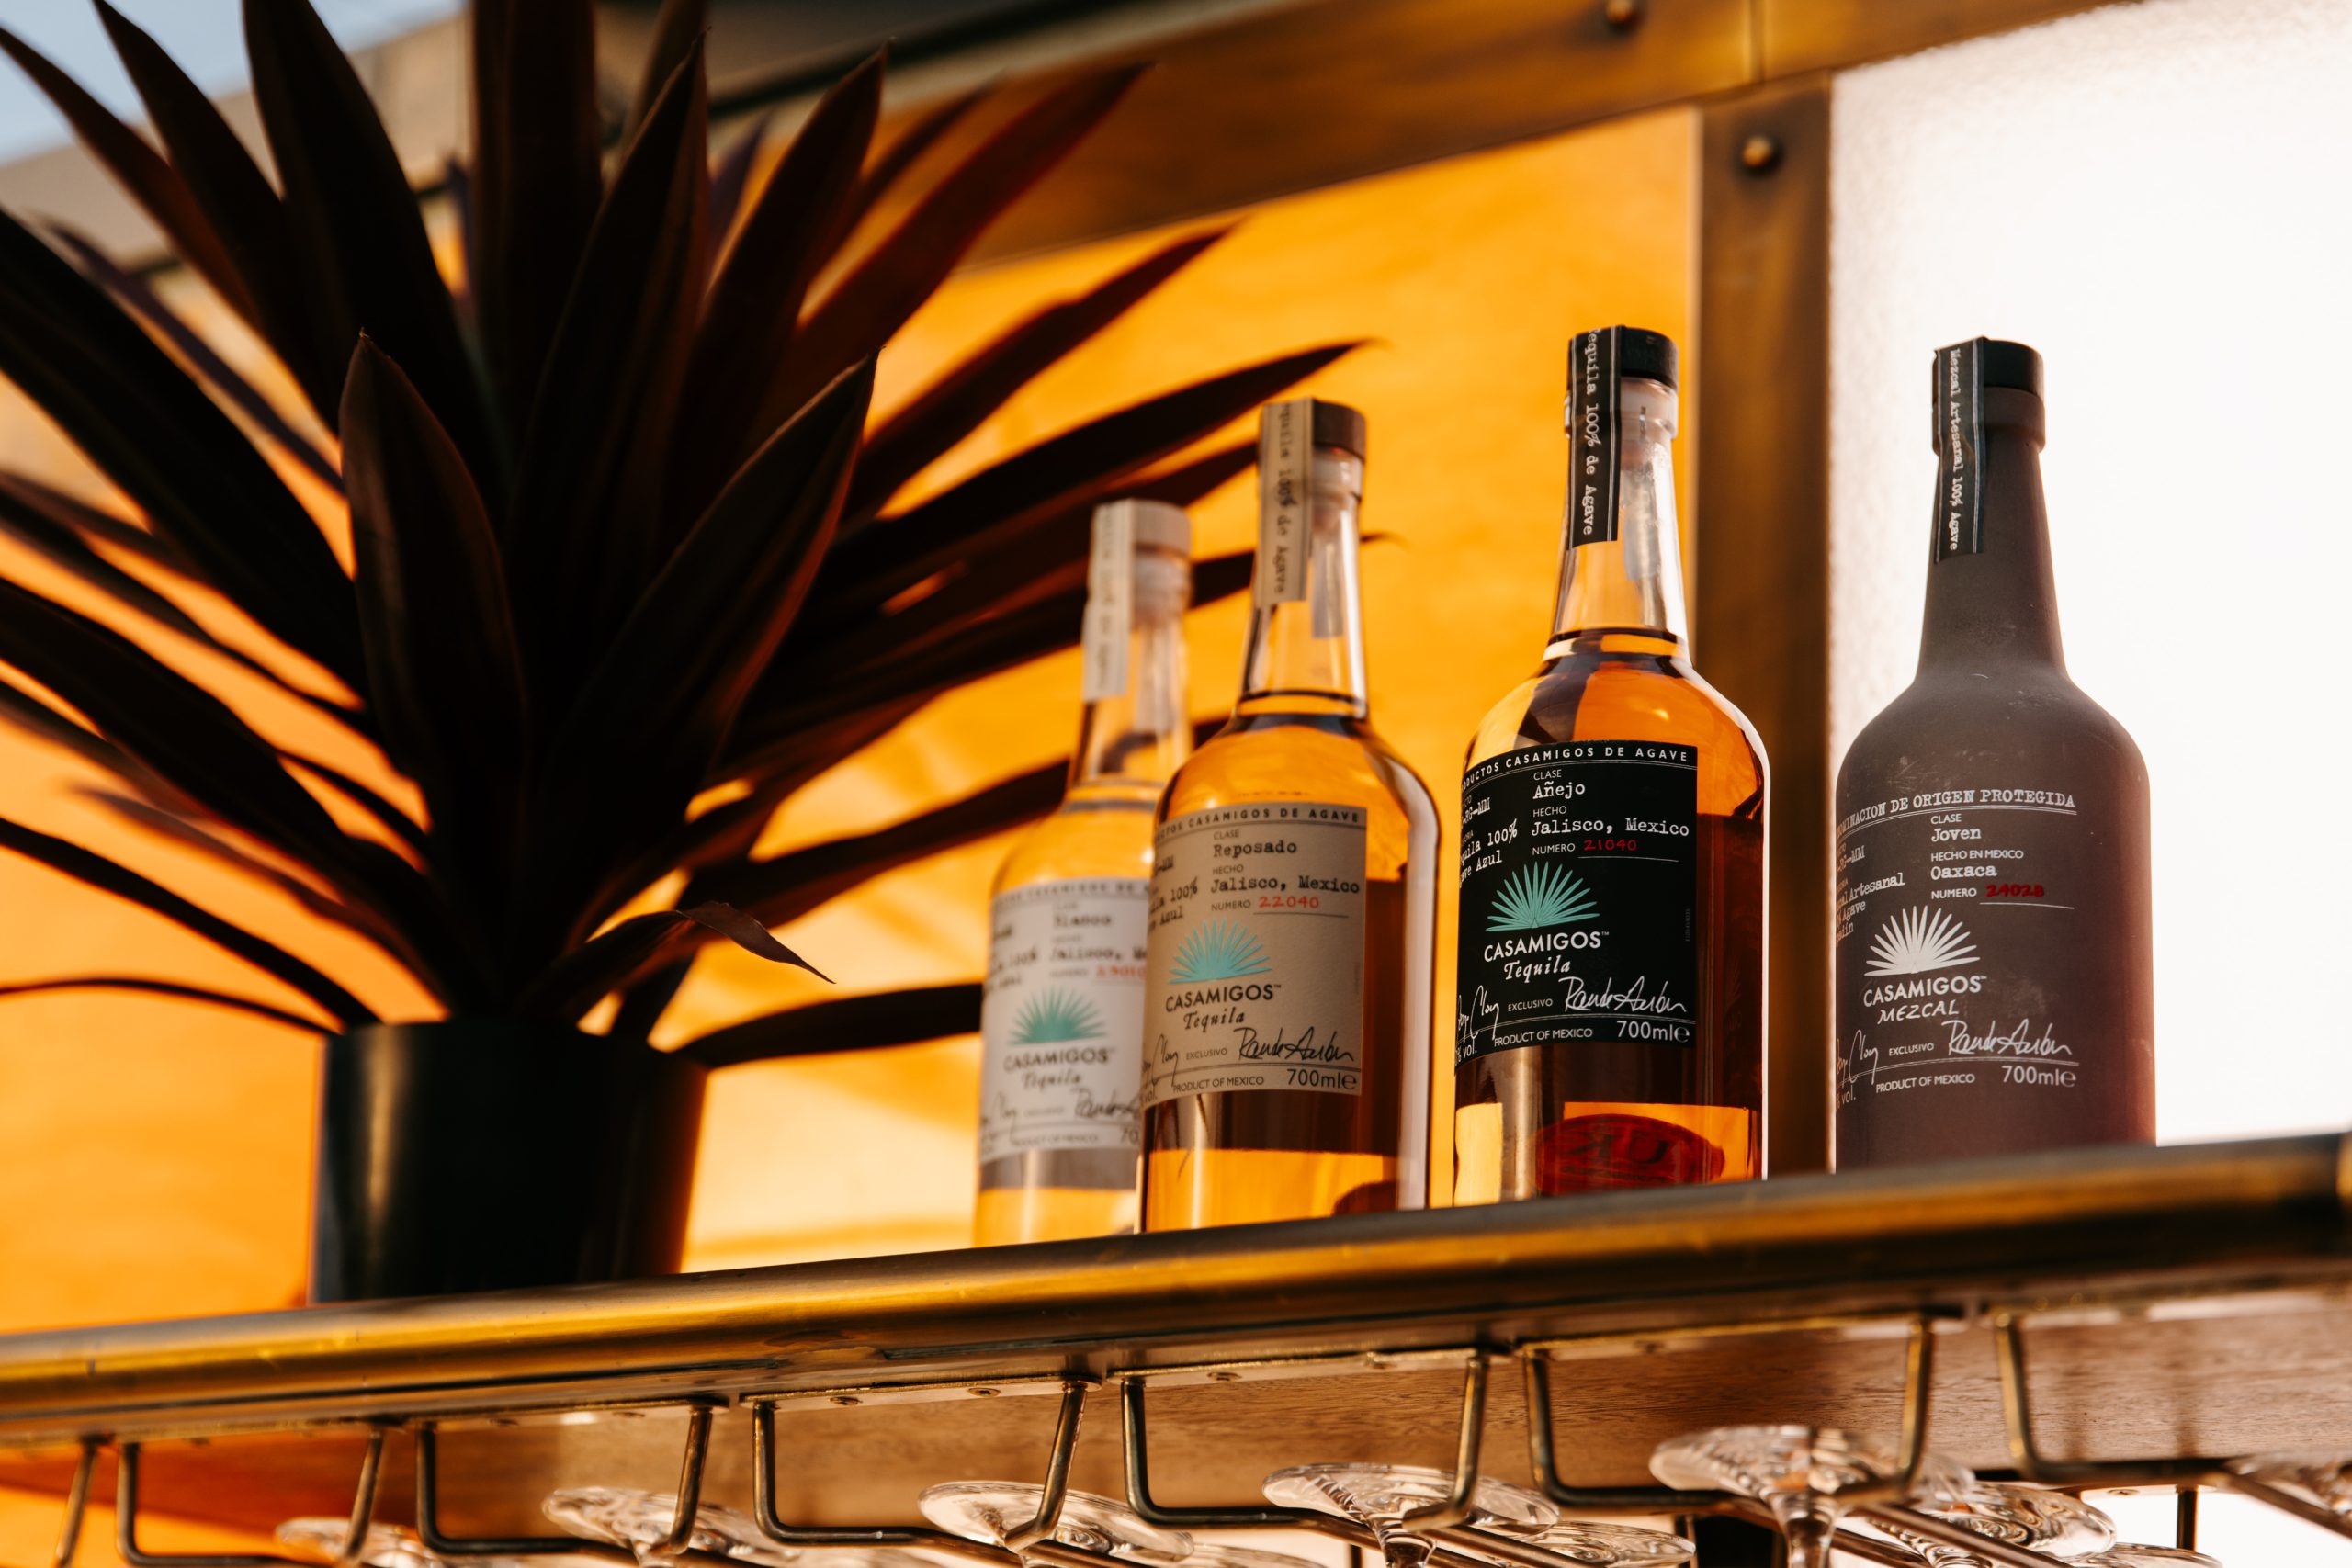 Bottles of Casamigos on a bar in London